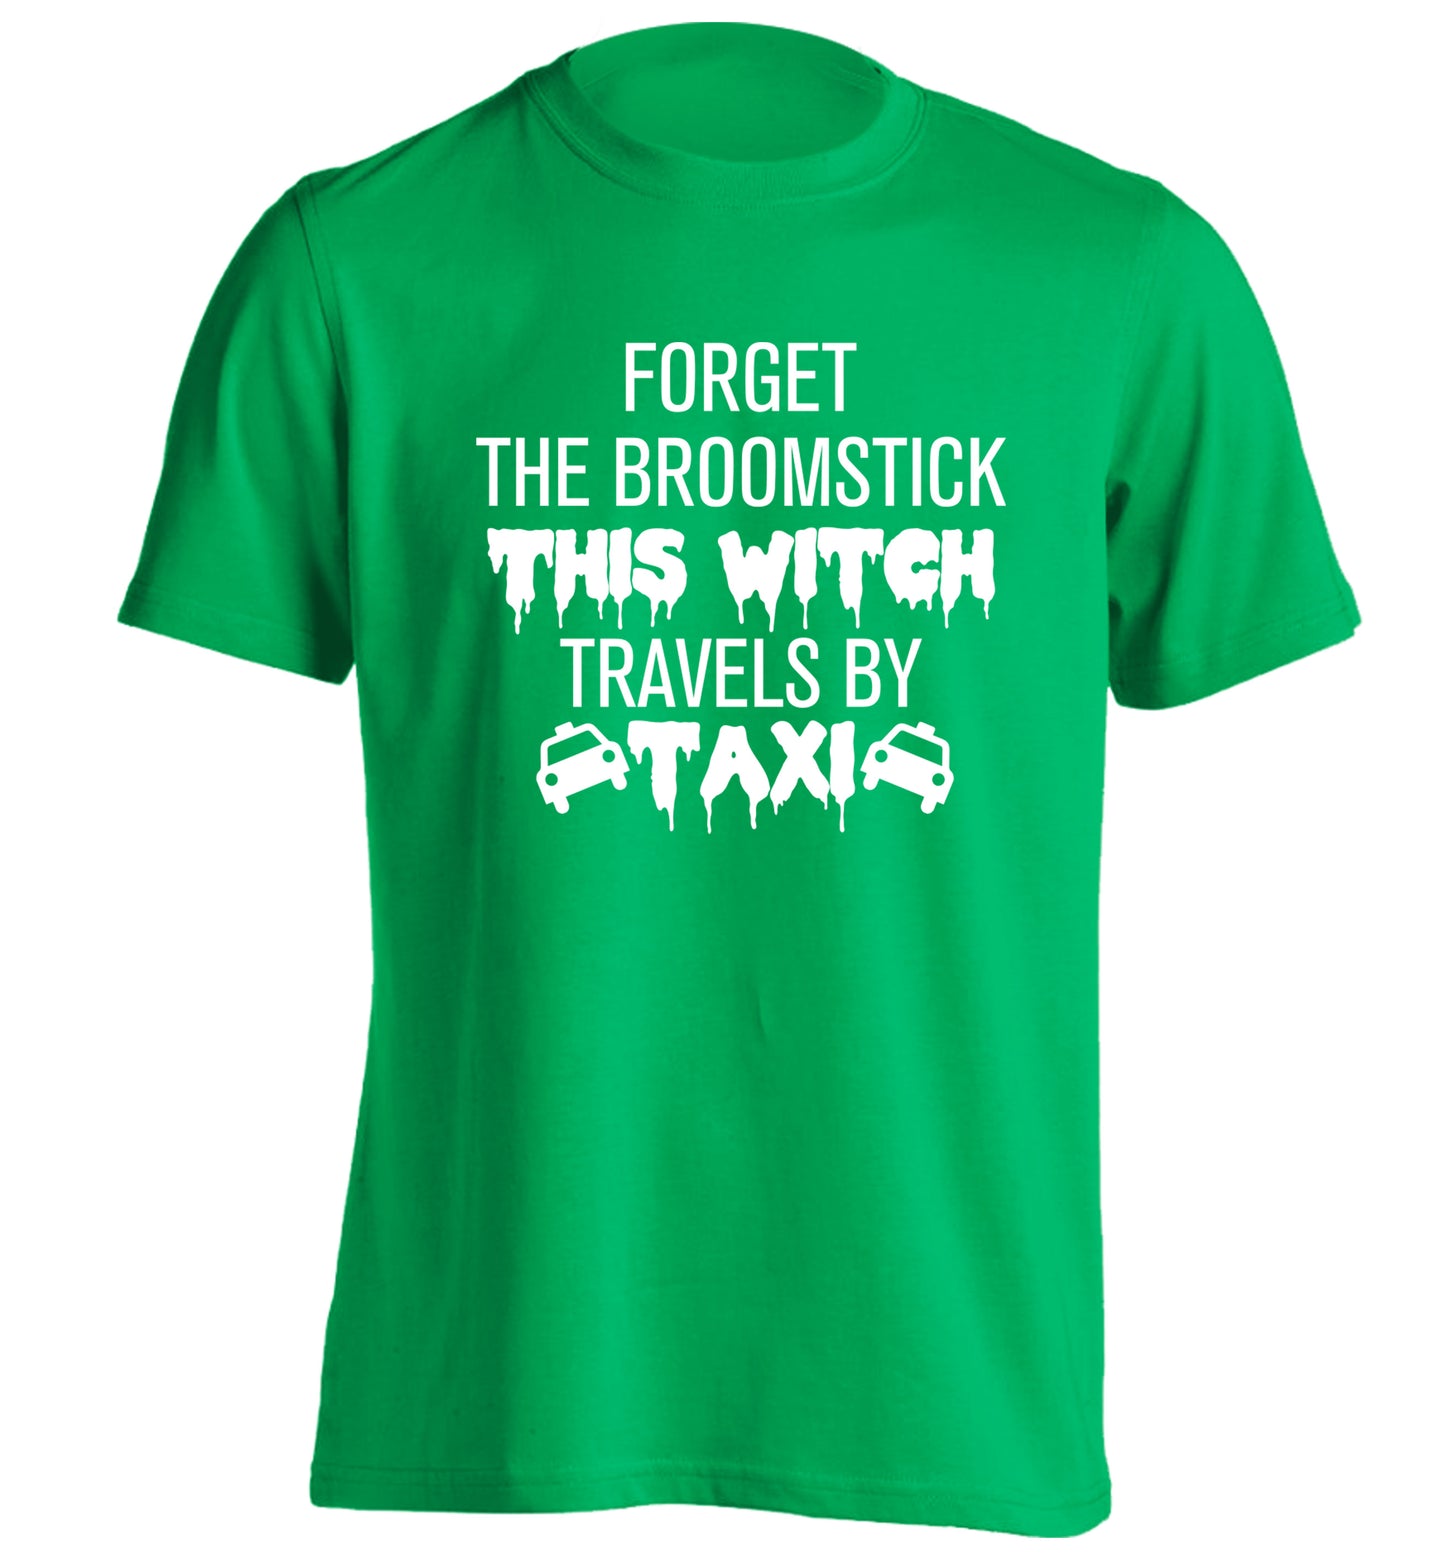 Forget the broomstick this witch travels by taxi adults unisexgreen Tshirt 2XL